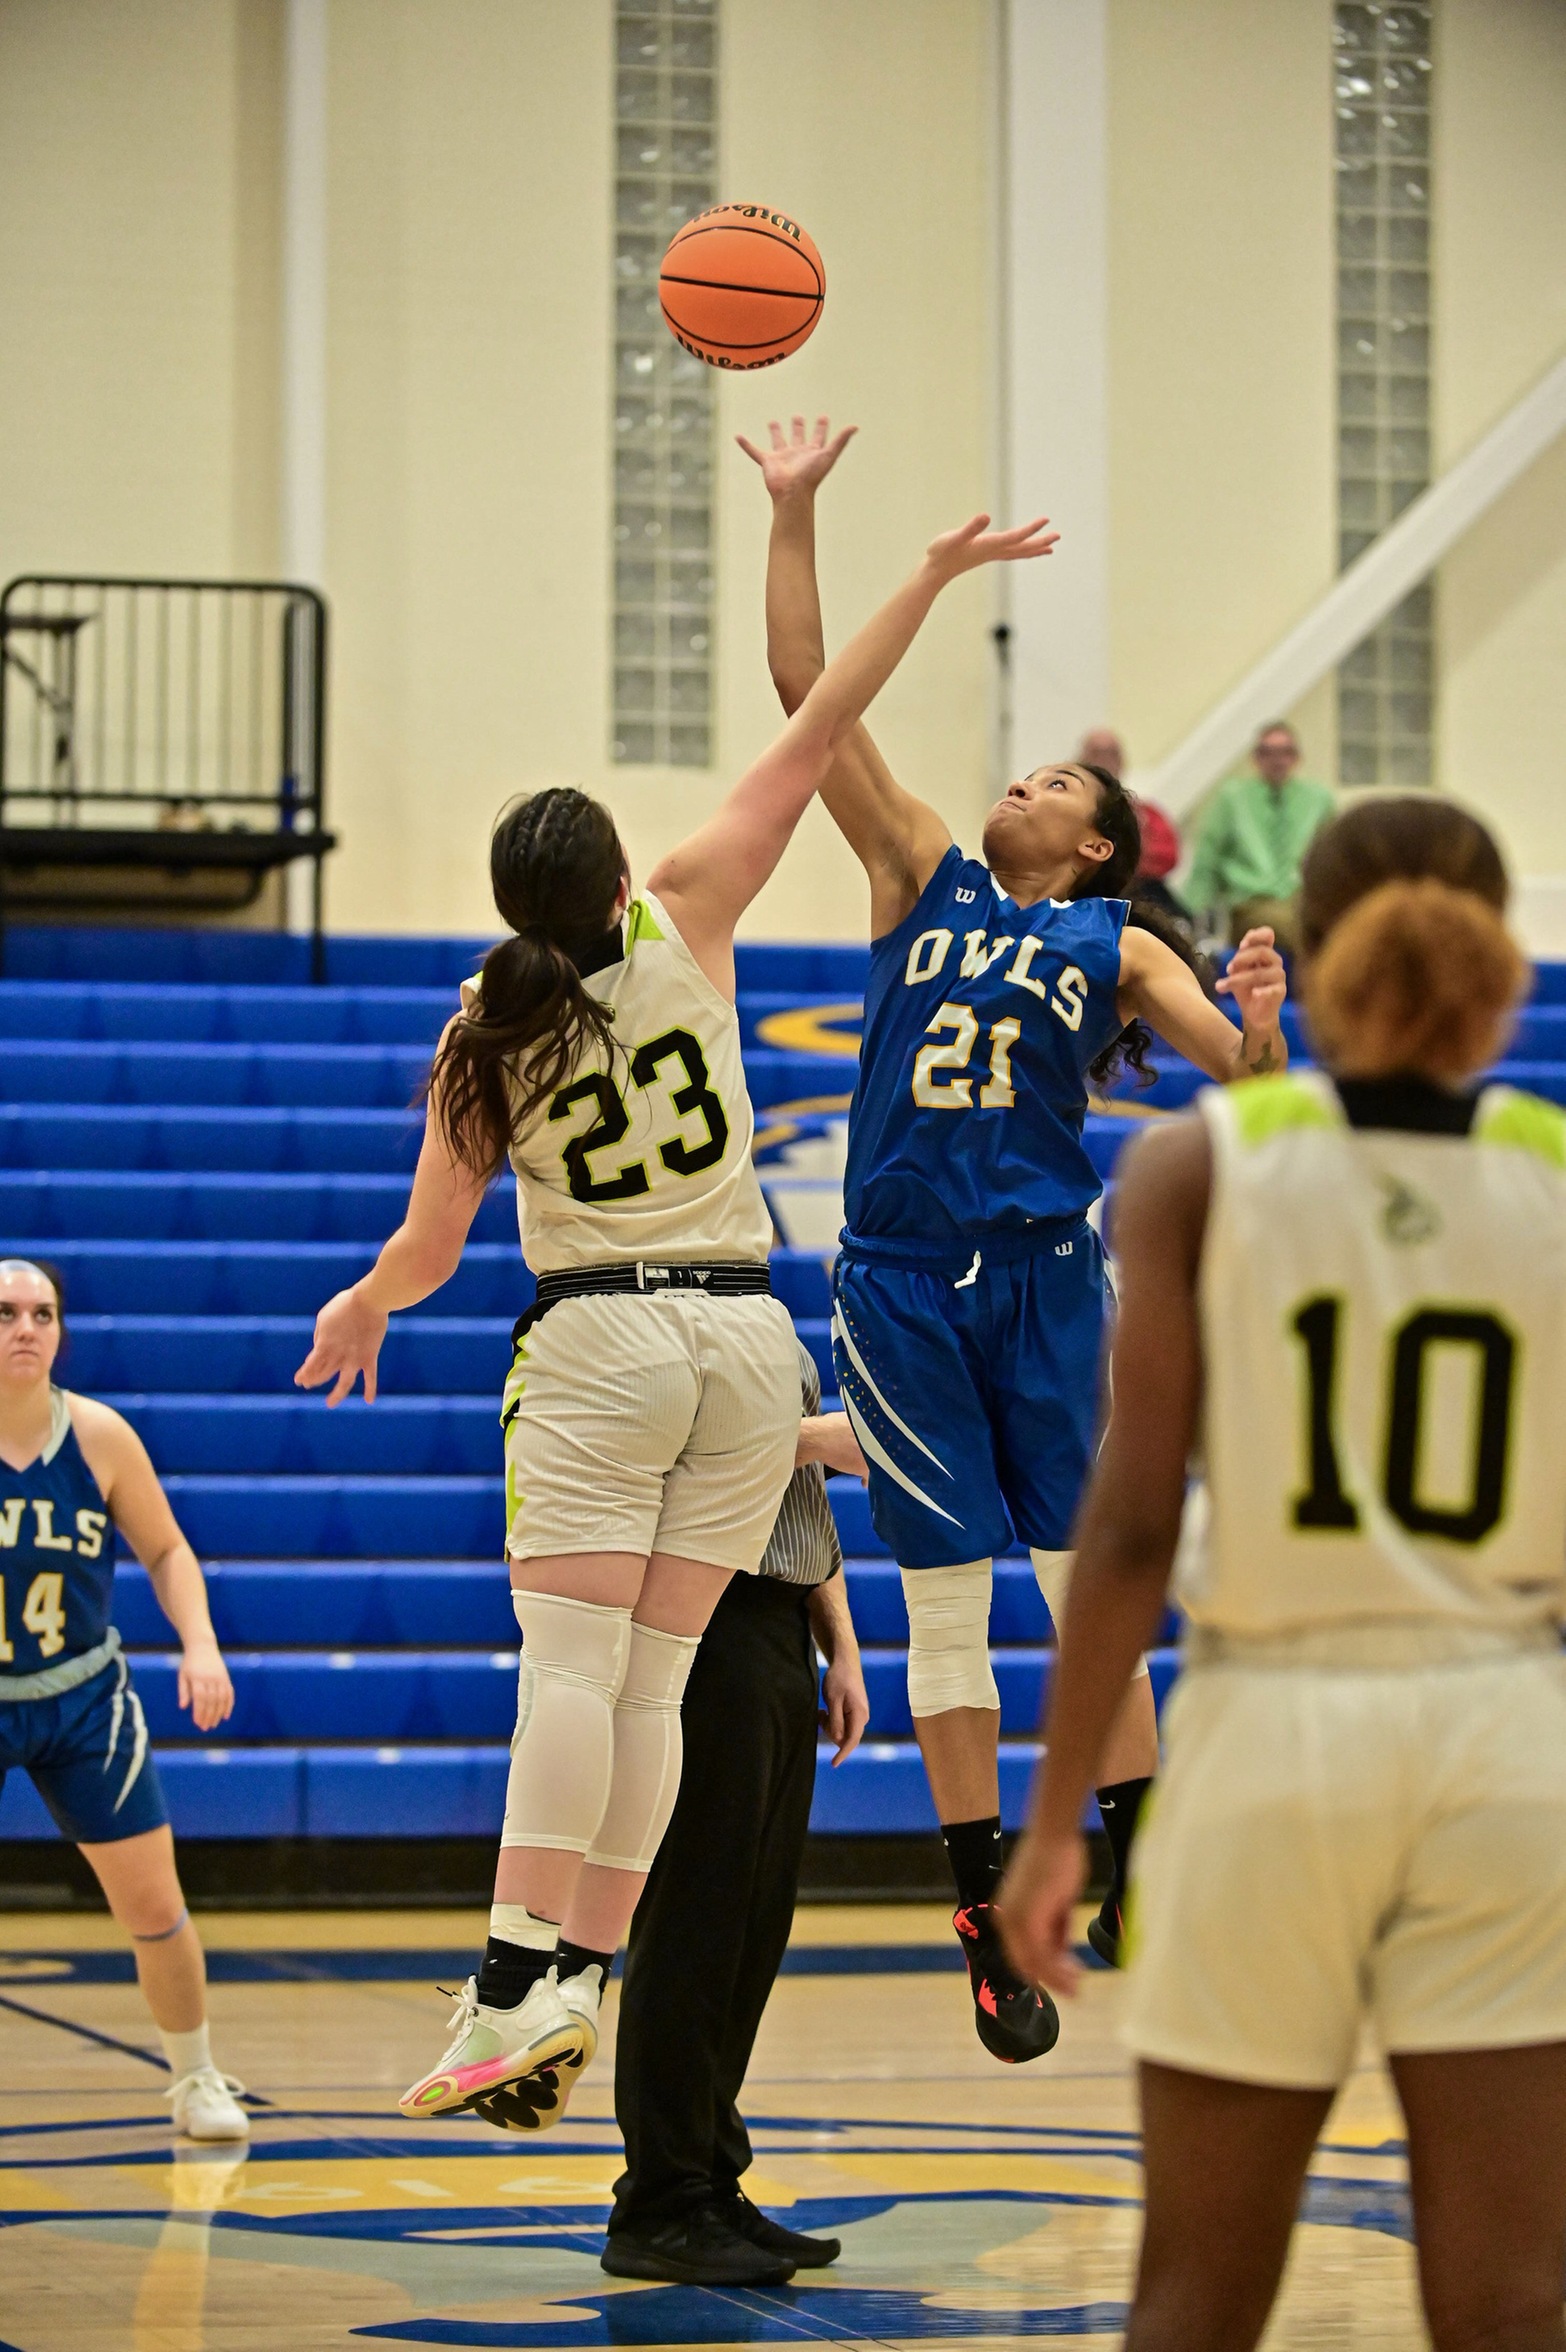 Women's Basketball Bested by SUNY Cobleskill in 104-20 Loss